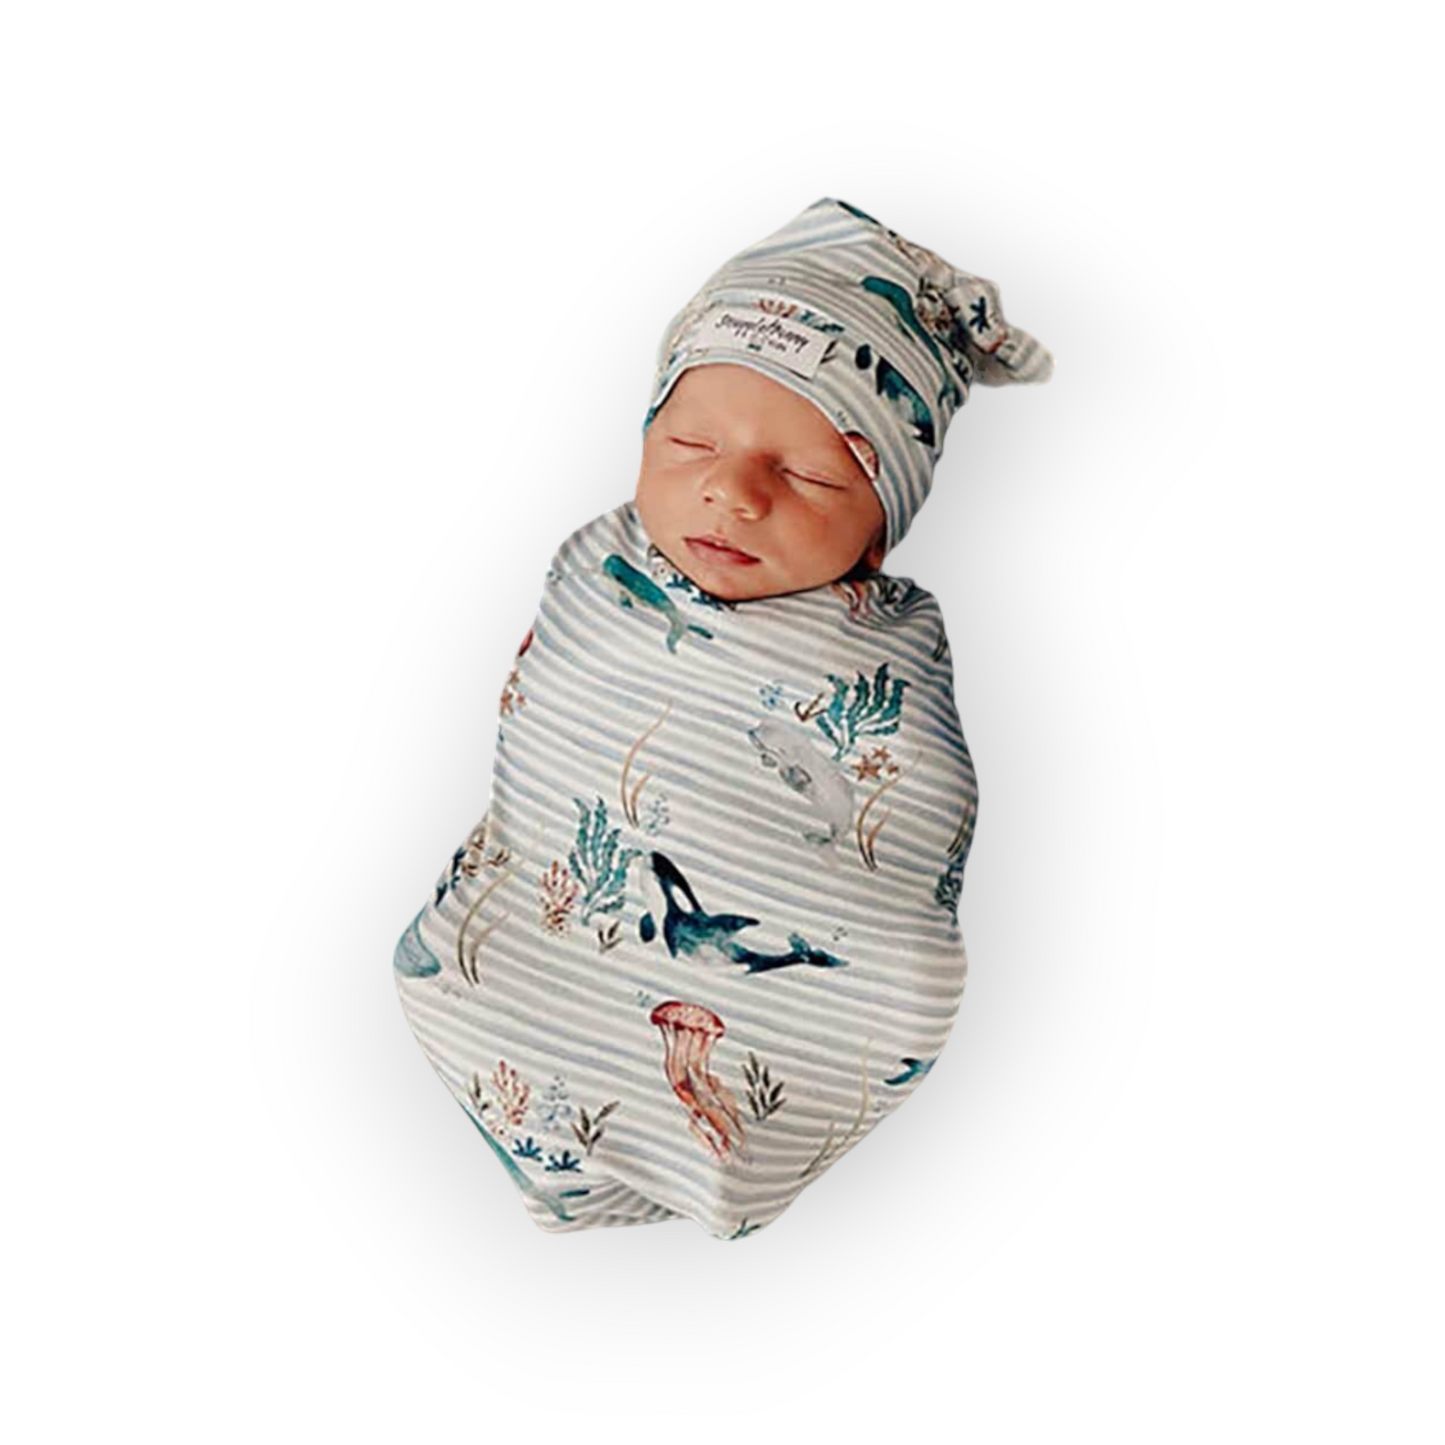 Baby Gift - Organic Snuggle Swaddle Wrap and Topknot or Beanie Set